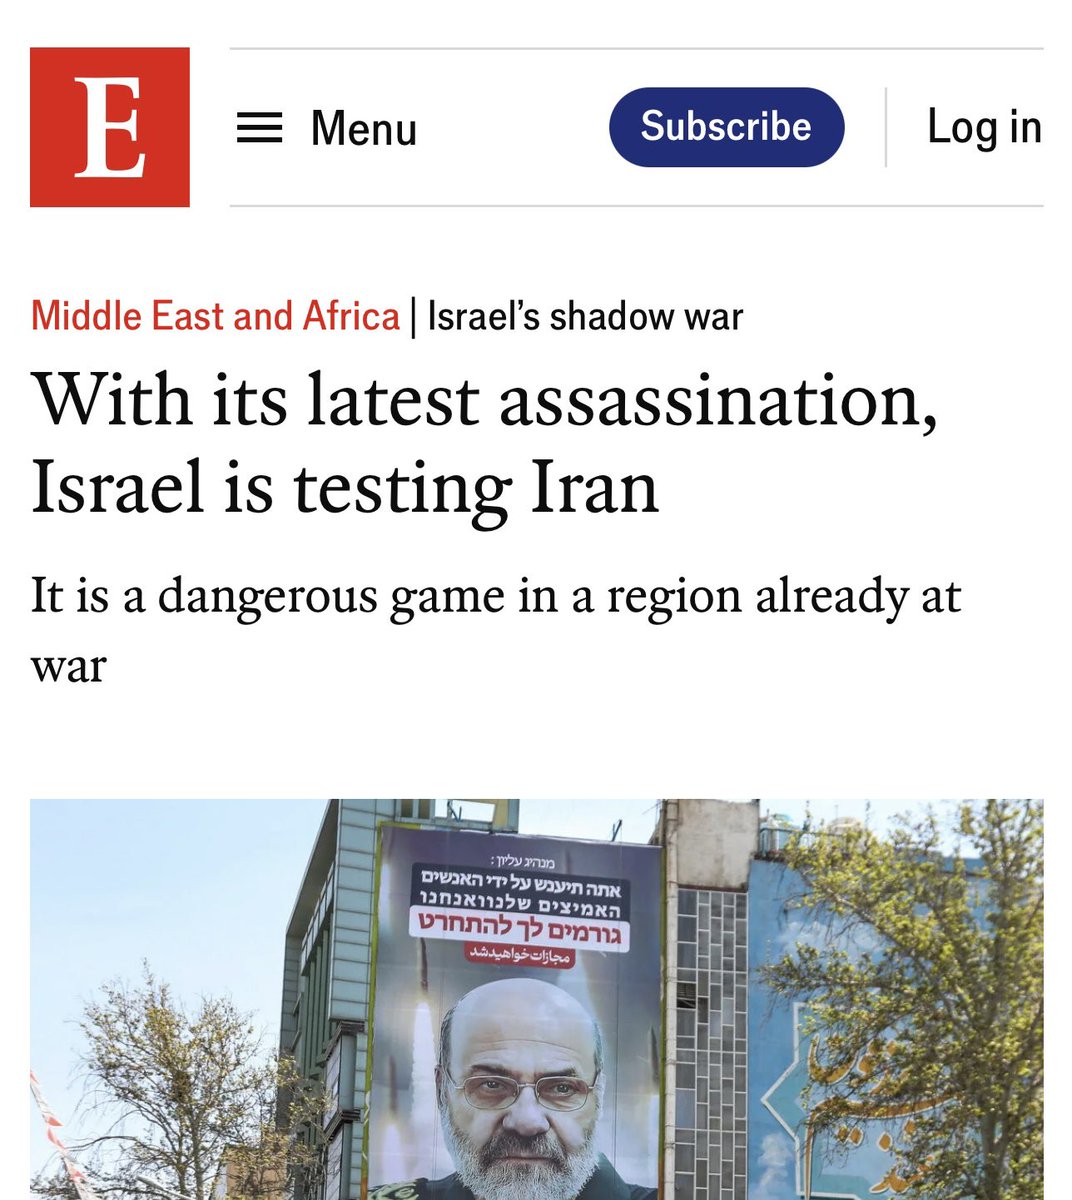 As you watch Western media cover Iran’s retaliatory attack as a major escalation and the fear of a larger war, remember this is how they covered Israel’s embassy attack that prompted the retaliation. International norms don’t work if you apply them selectively.